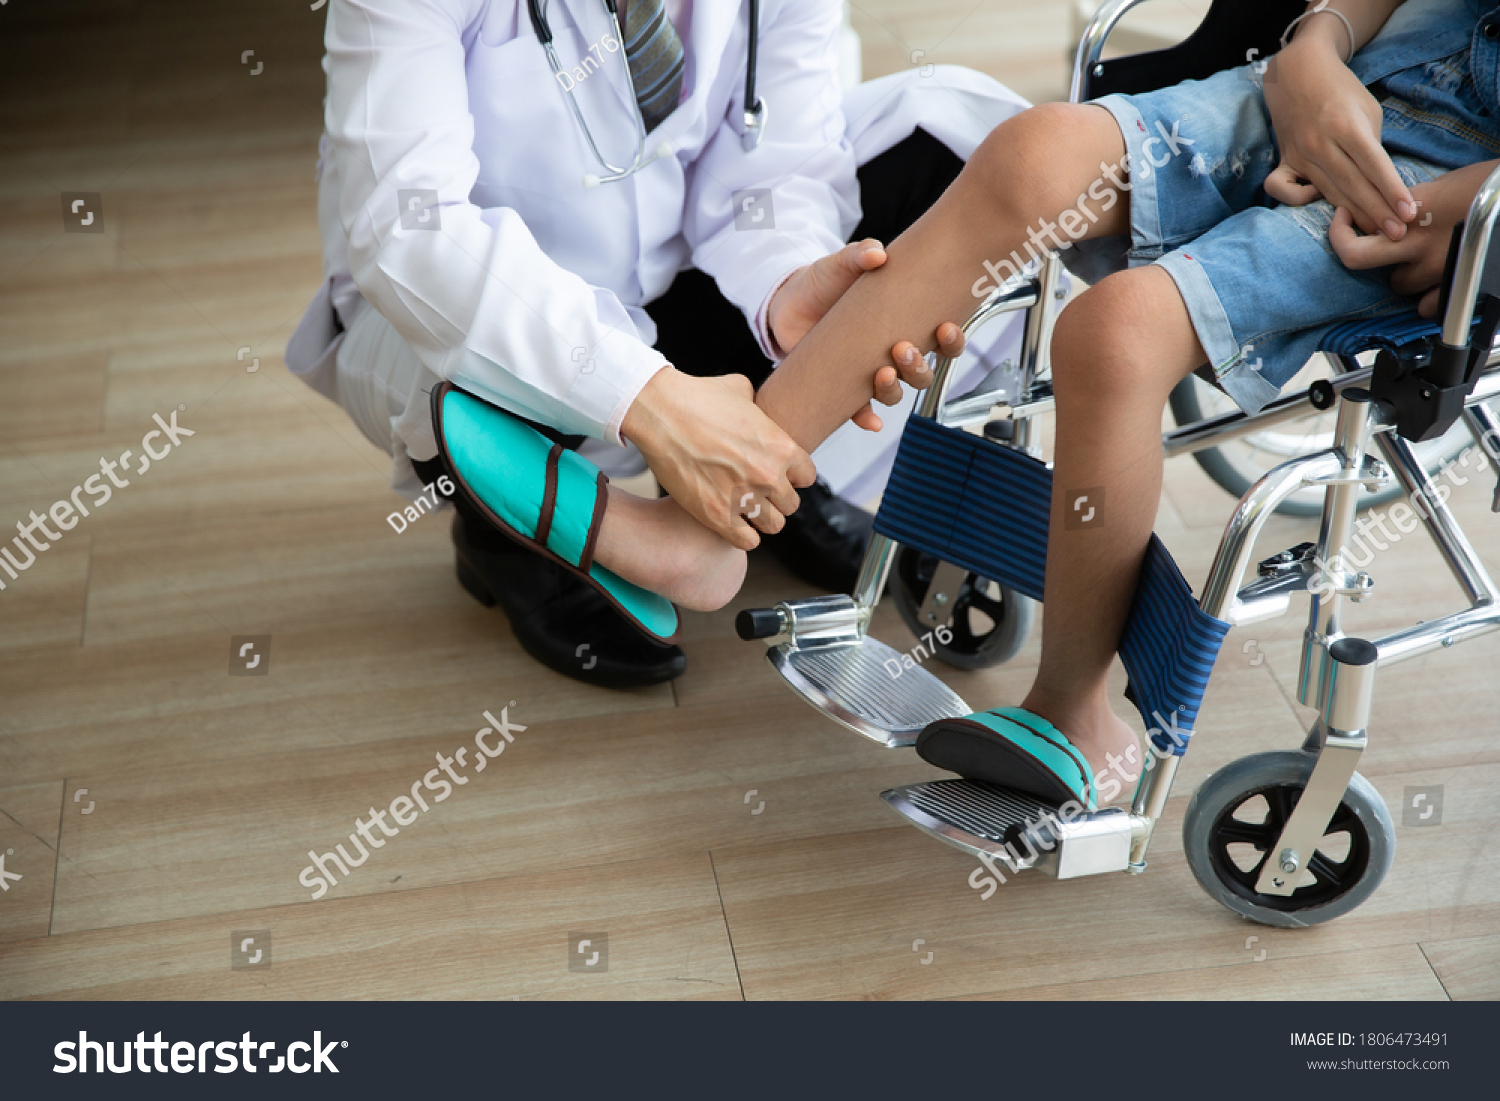 Doctor checking disabled person pateint leg at hospital, Muscle weakness #1806473491